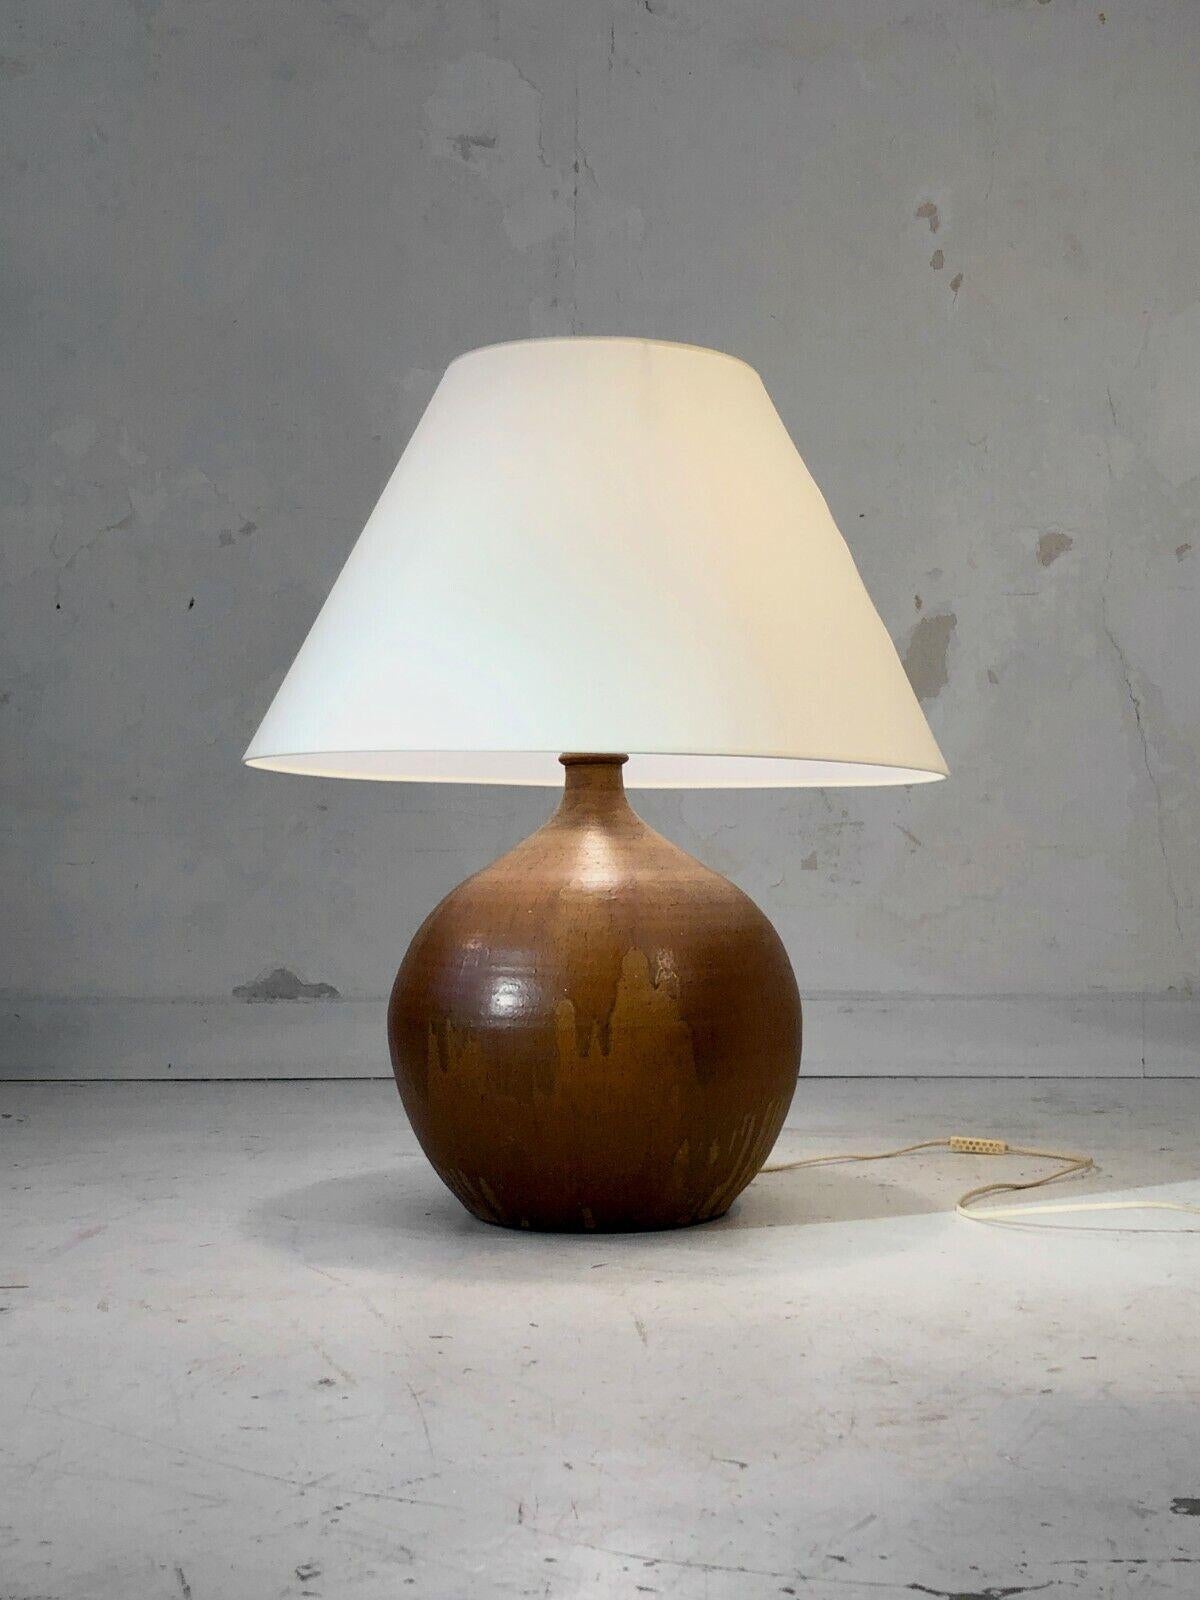 A very large table or floor lamp with a generous body, Modernist, Free-Form, Brutalist, Rustic-Modern, in thick sandstone with random dripping decorations, without signature, to be attributed, La Borne, France 1970.

A SECOND VERY SIMILAR LAMP IS ON